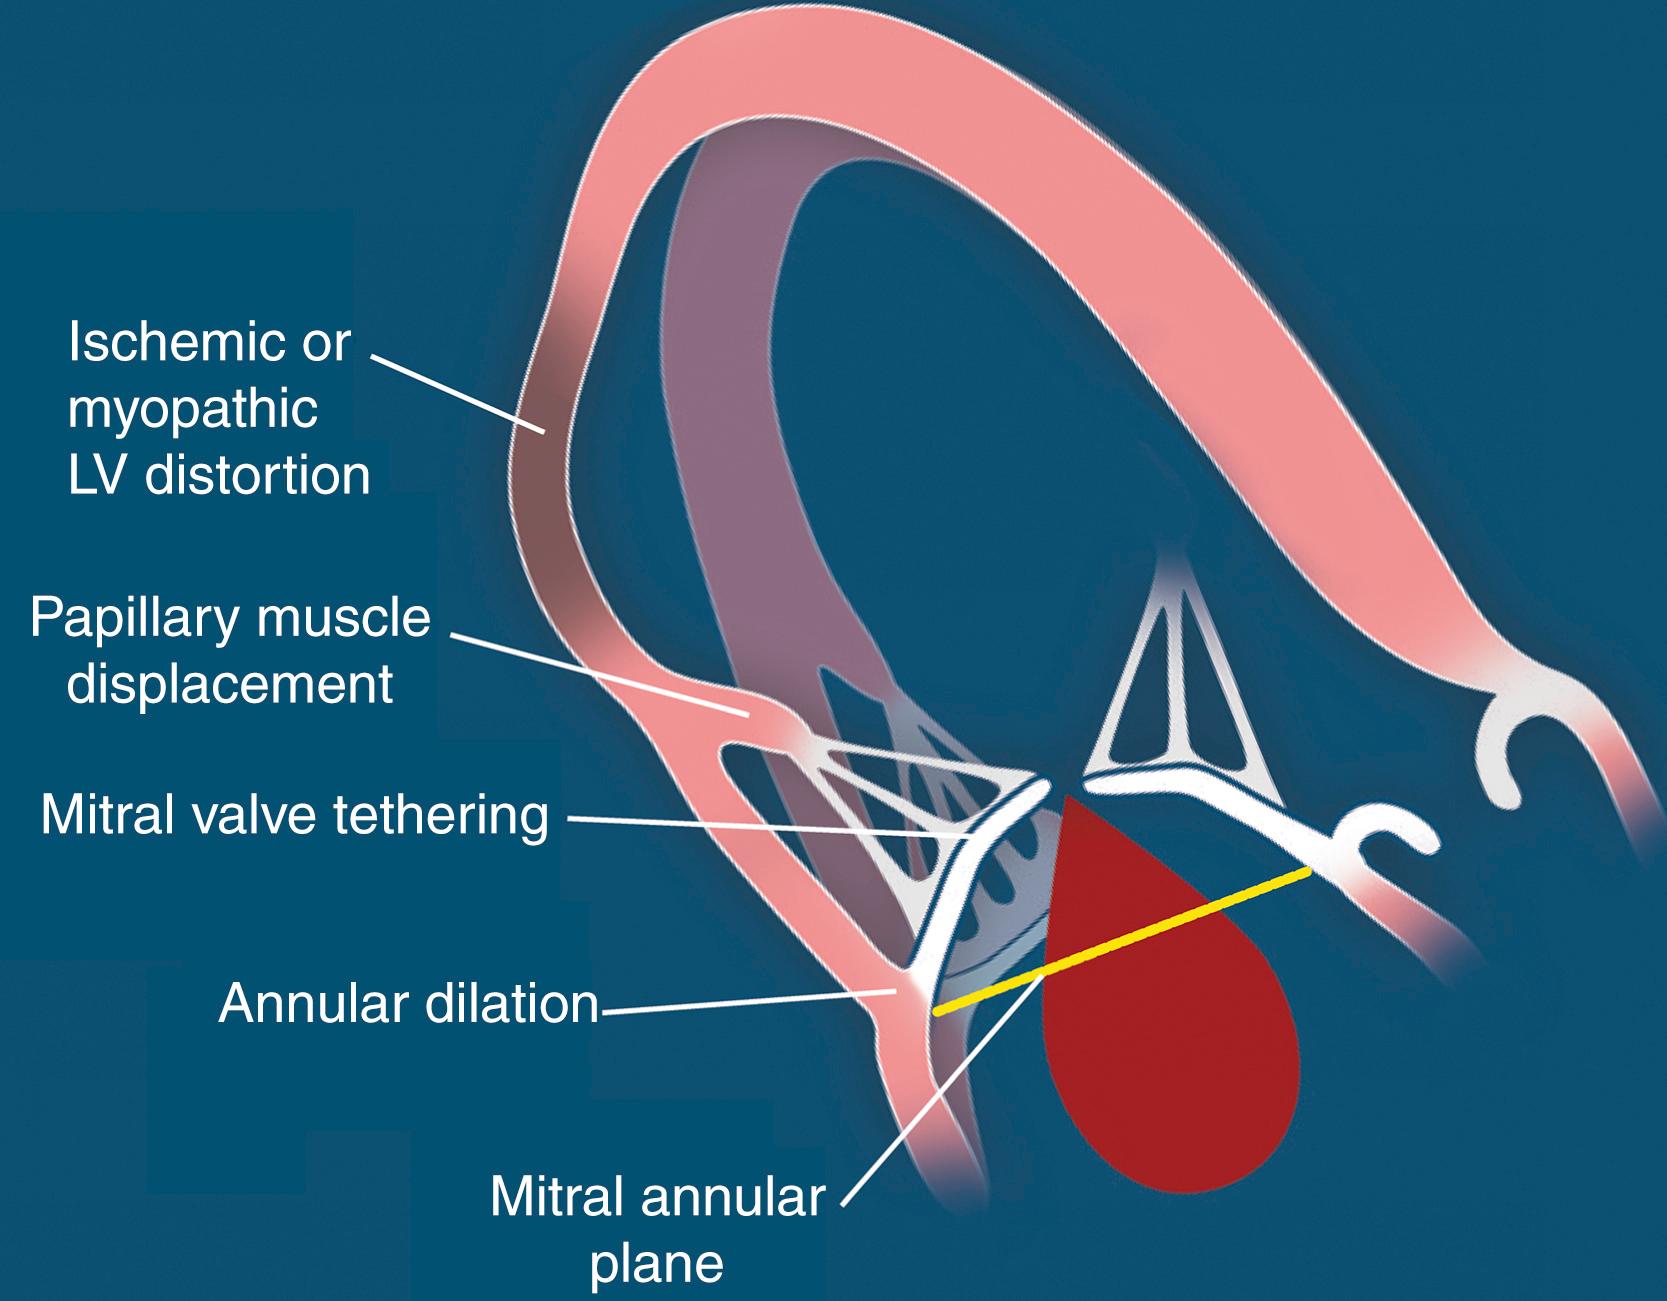 Figure 97.1, Secondary mitral regurgitation caused by ventricular distortion of the mitral valve apparatus. Note the apical and lateral displacement of the papillary muscles caused by left ventricular (LV) remodeling, which results in apical displacement of both mitral valve leaflets relative to the mitral annular plane, that is, “tenting.” (© American Society of Echocardiography.)